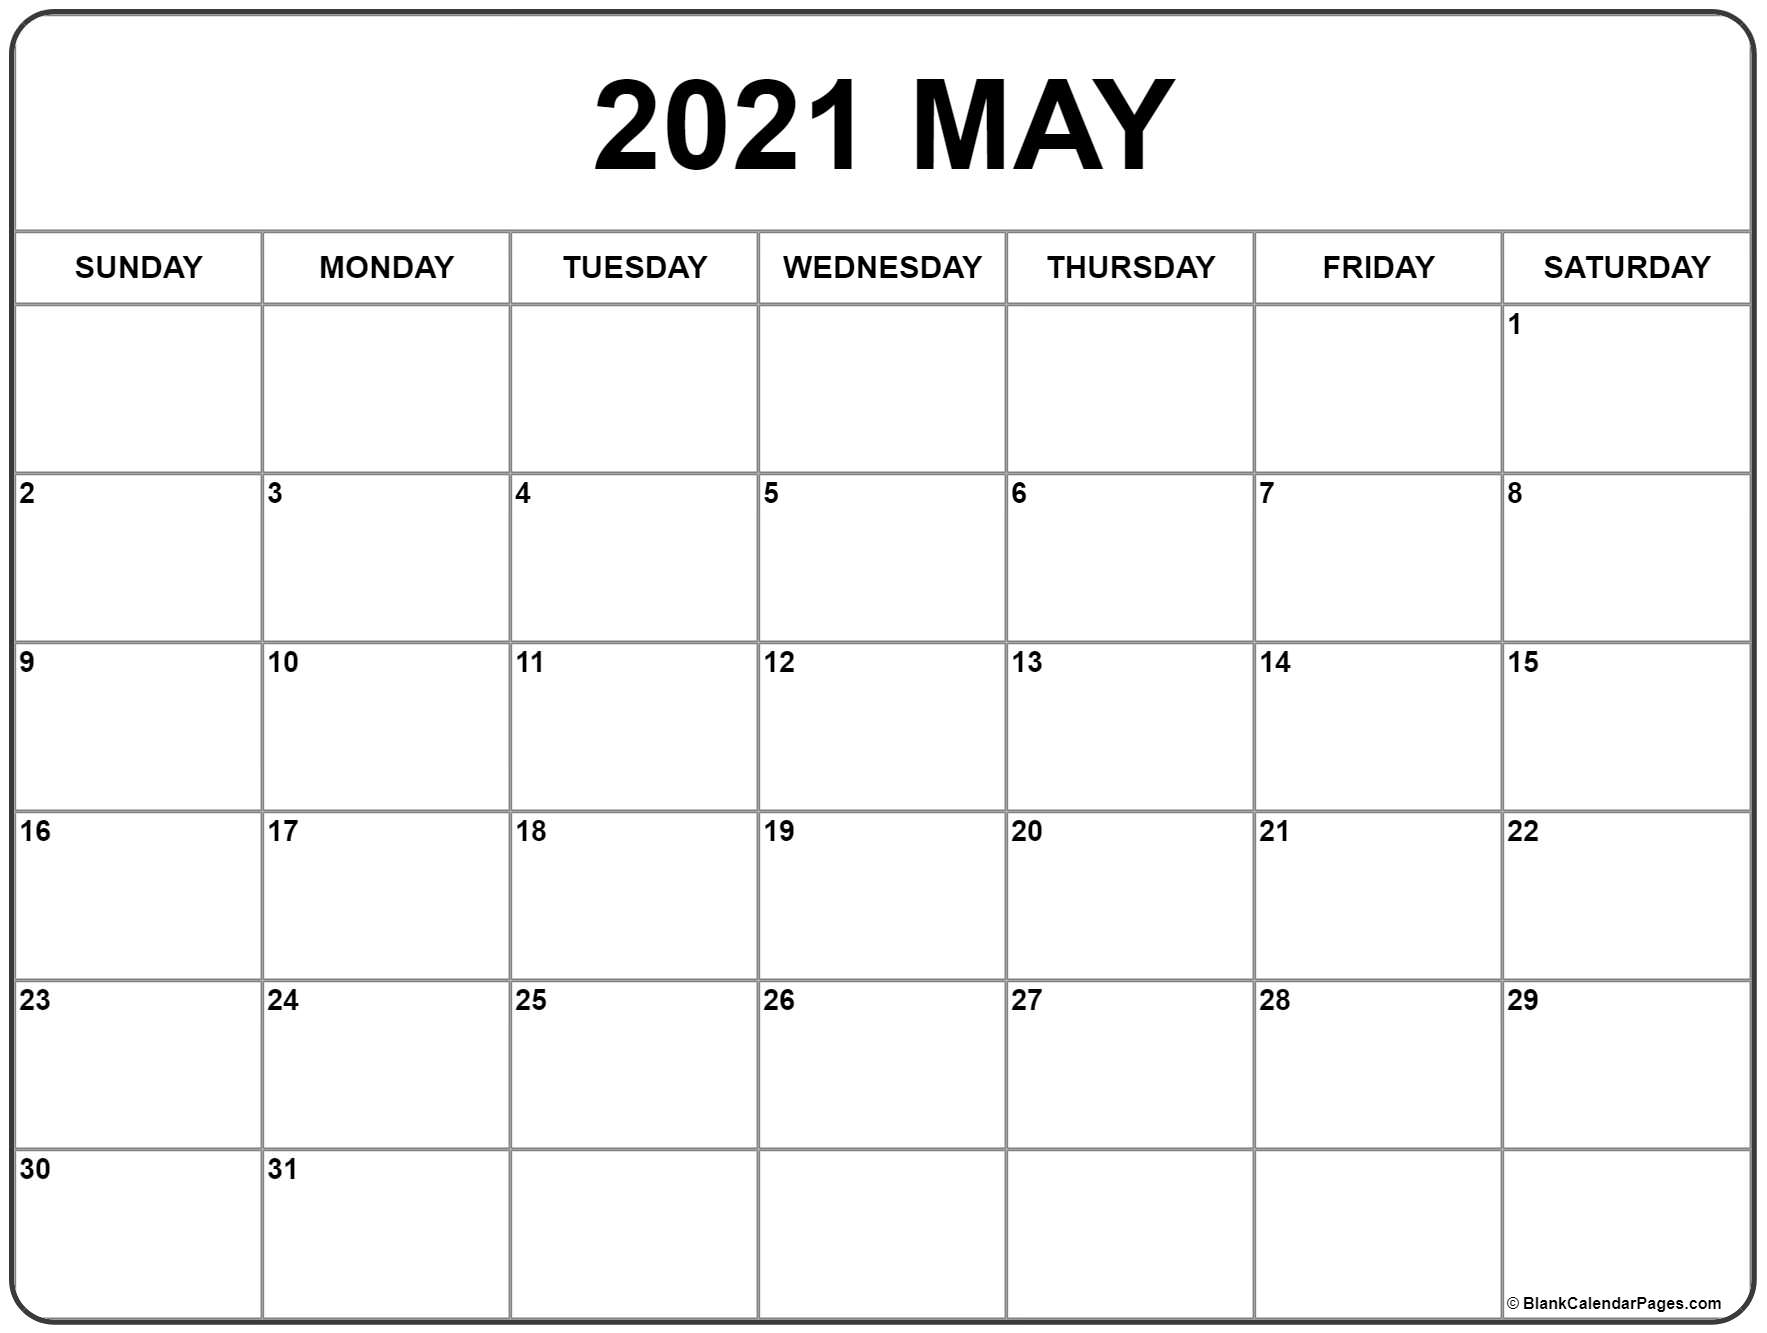 Get Print Free 2021 Calendar Without Downloading Monthly